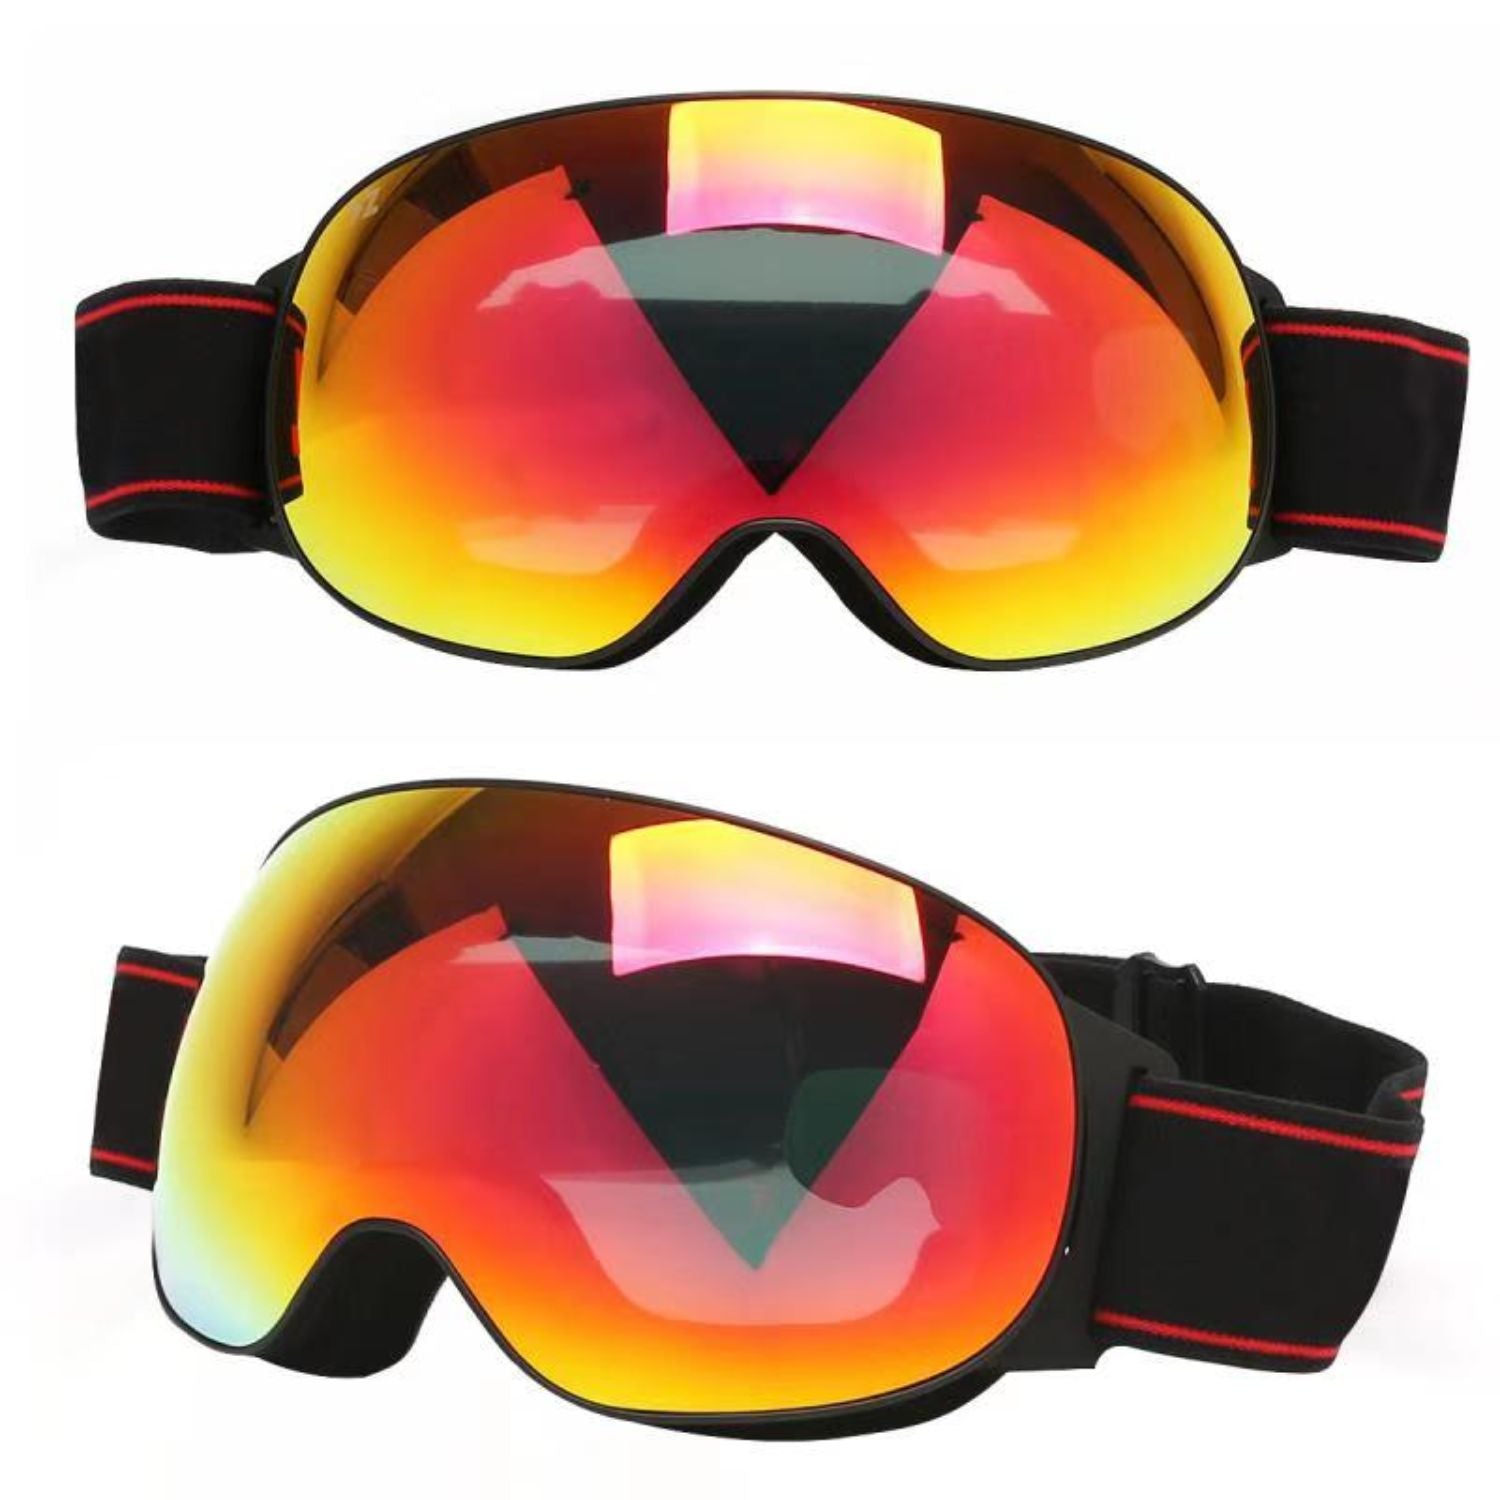 SG07 - Snowboard Ski UV Protection GOGGLES for Men and Women